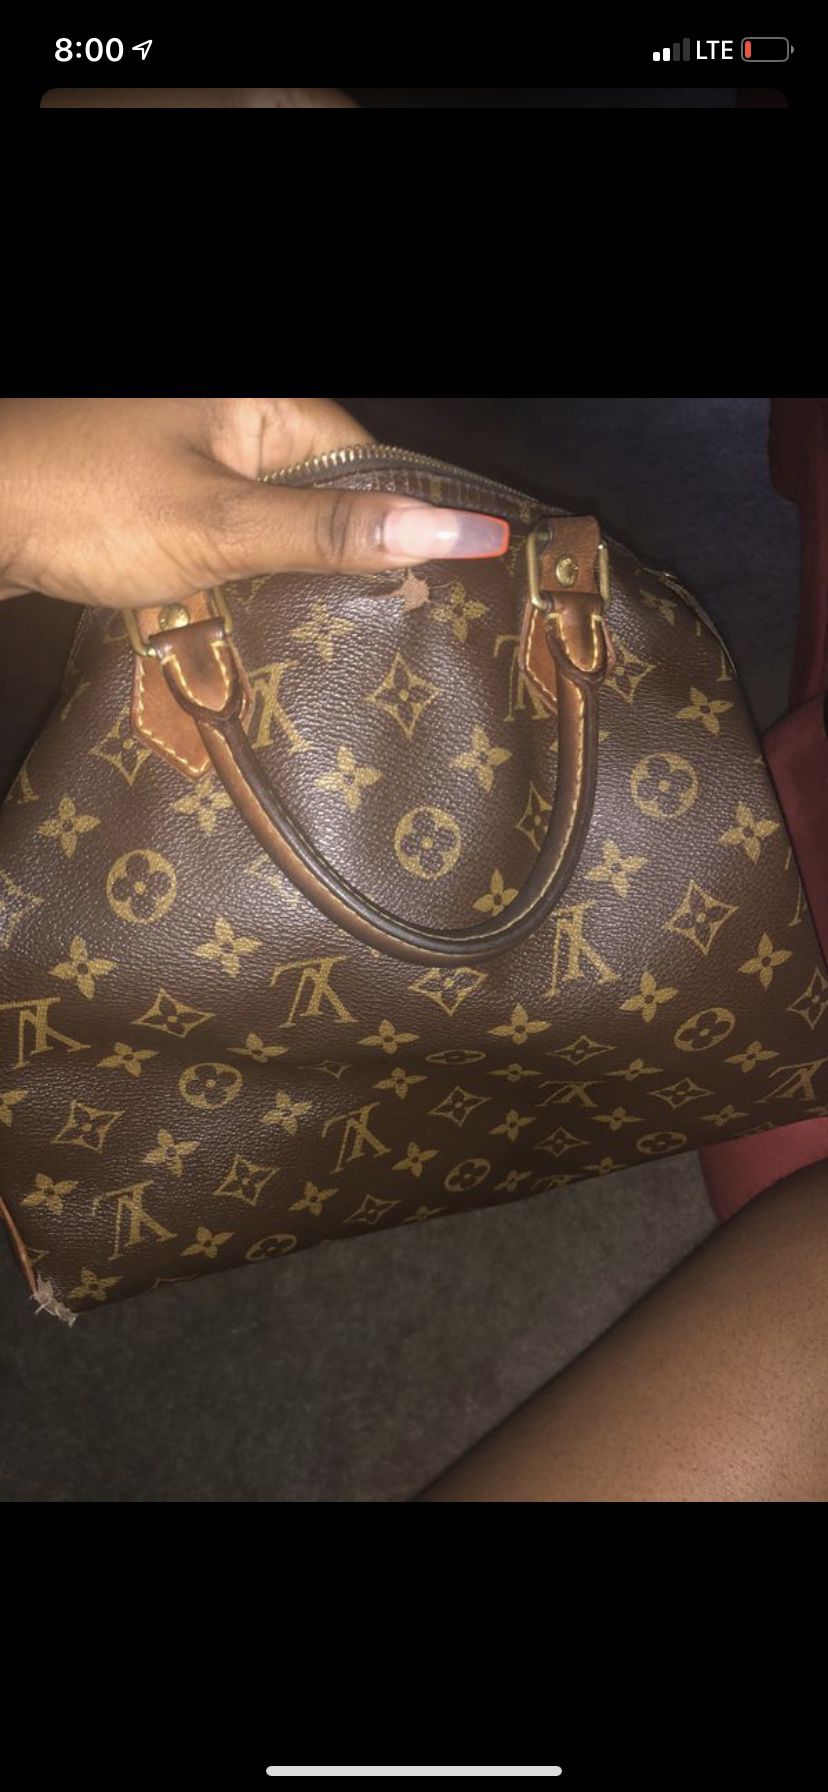 Speedy Louis Vuitton bag for sale! SERIOUS INQUIRES ONLY